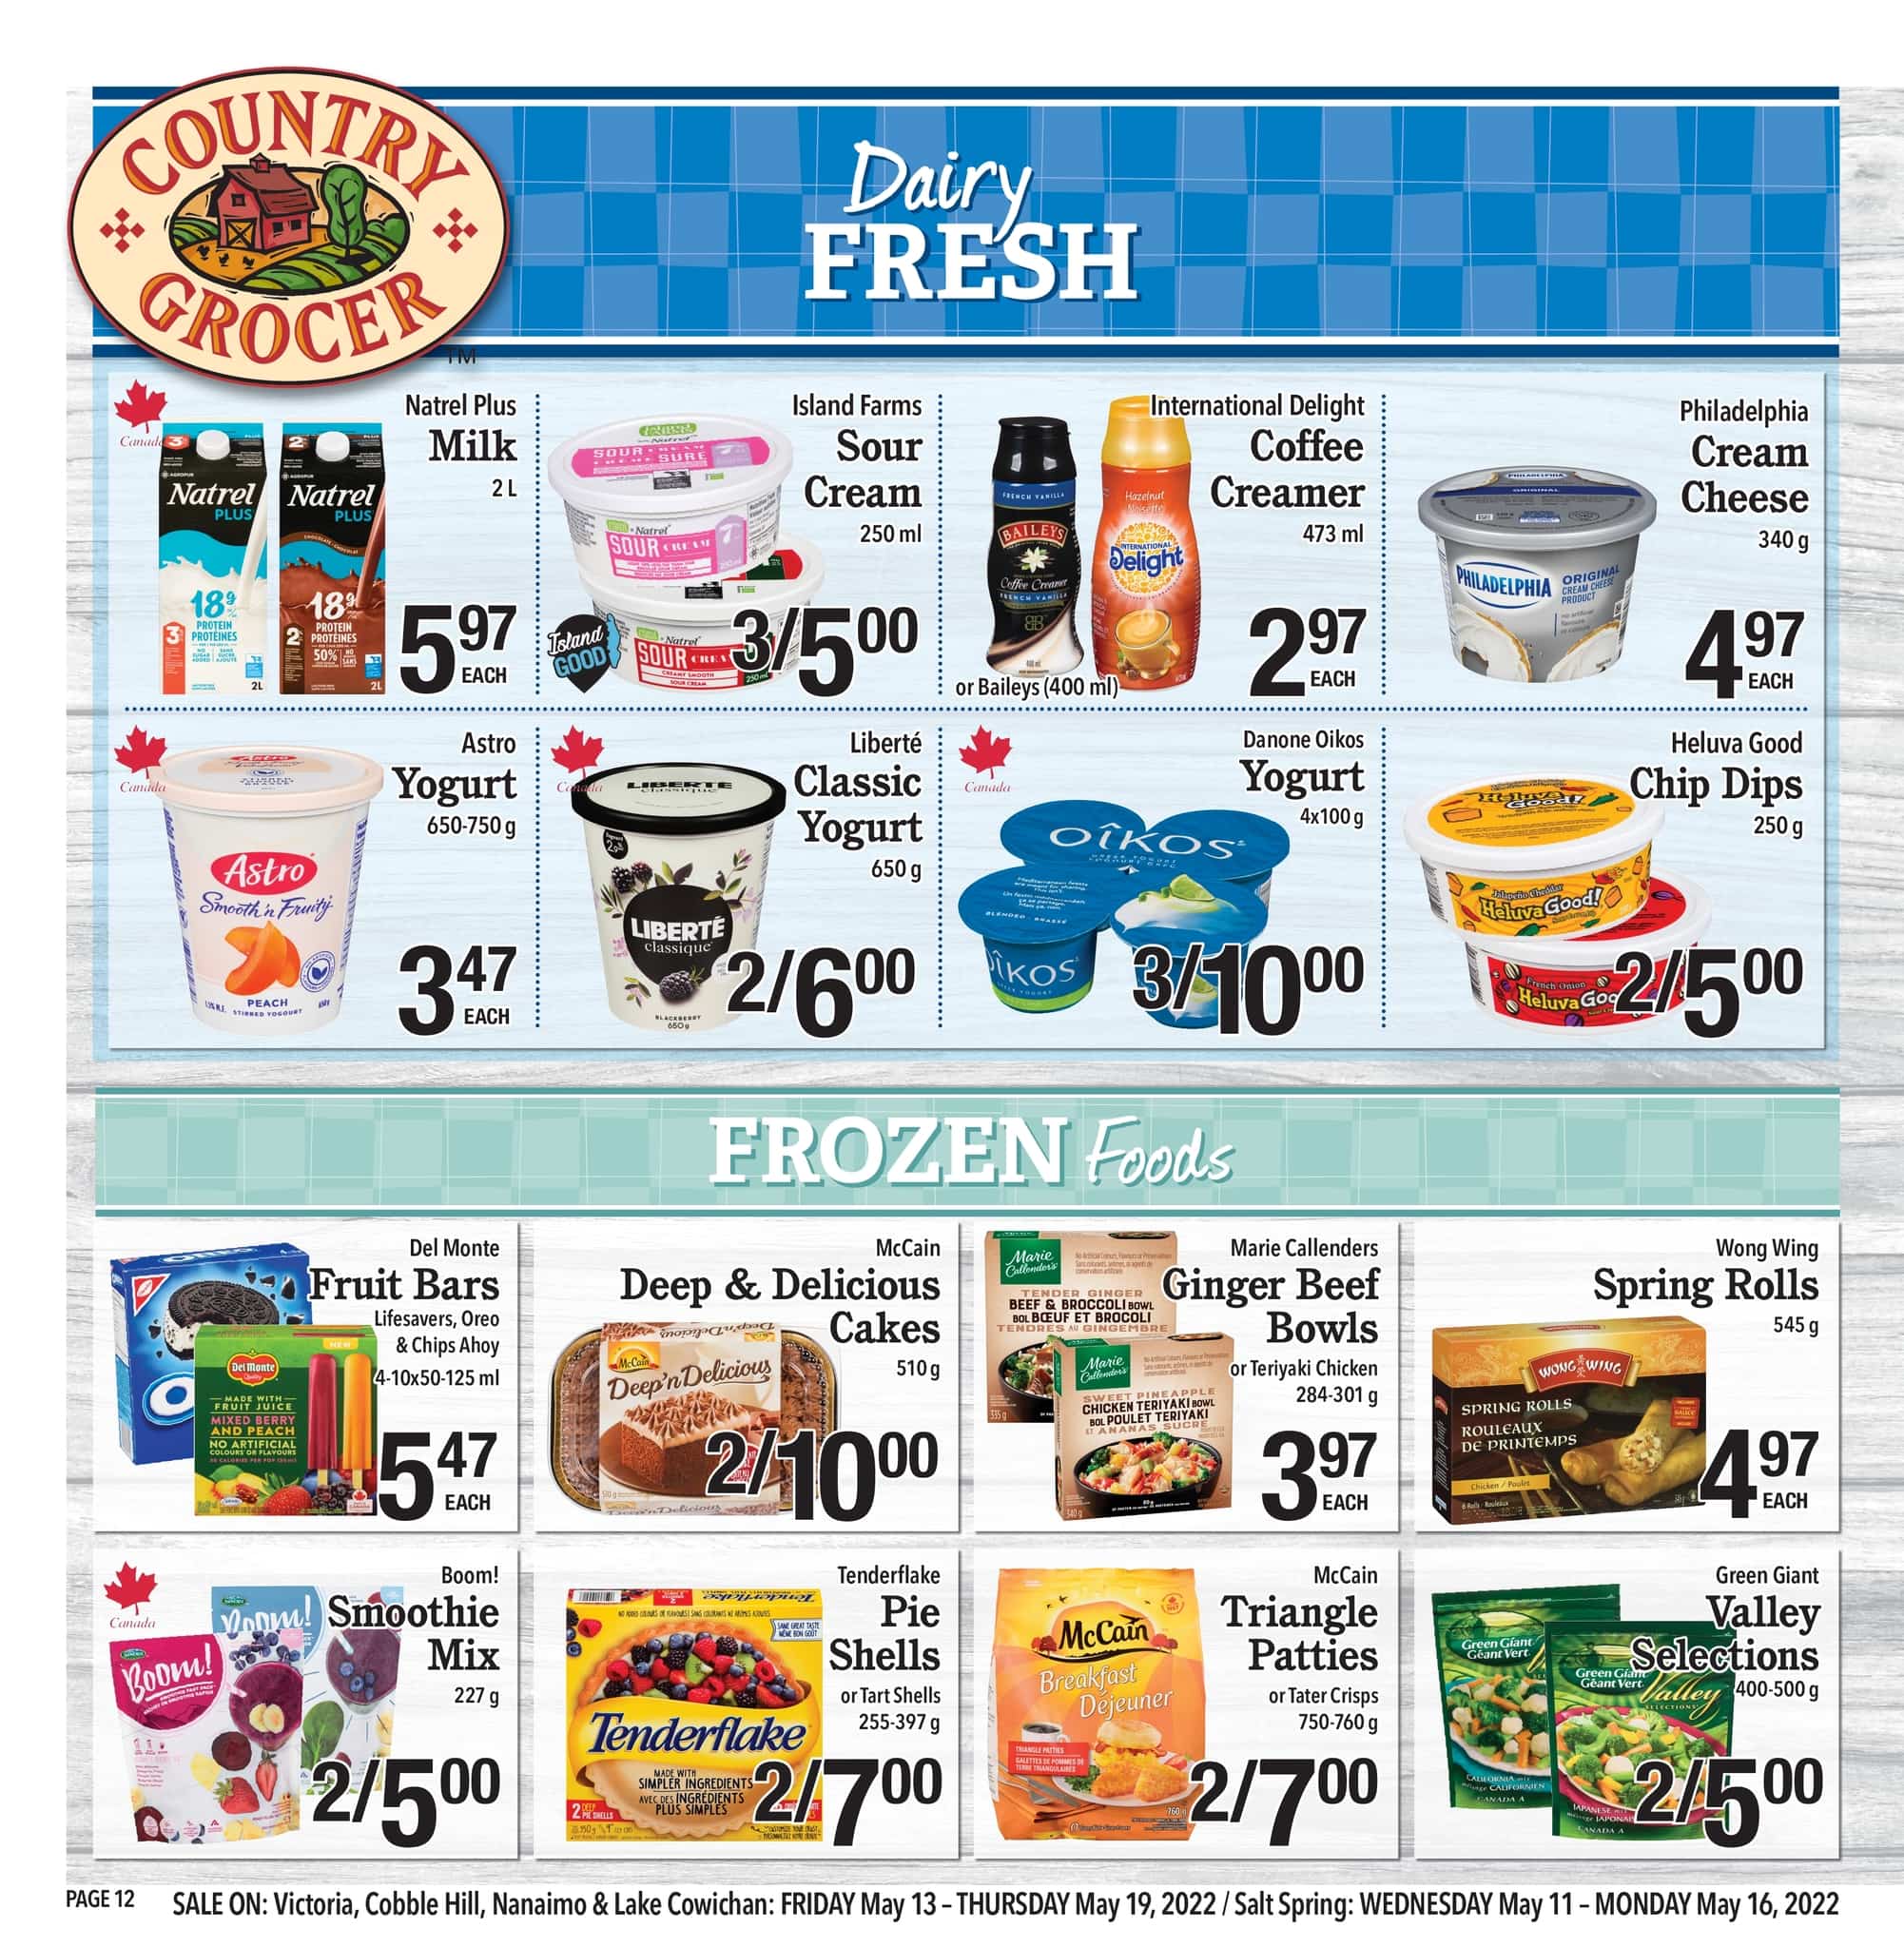 Country Grocer - Weekly Flyer Specials - Page 12